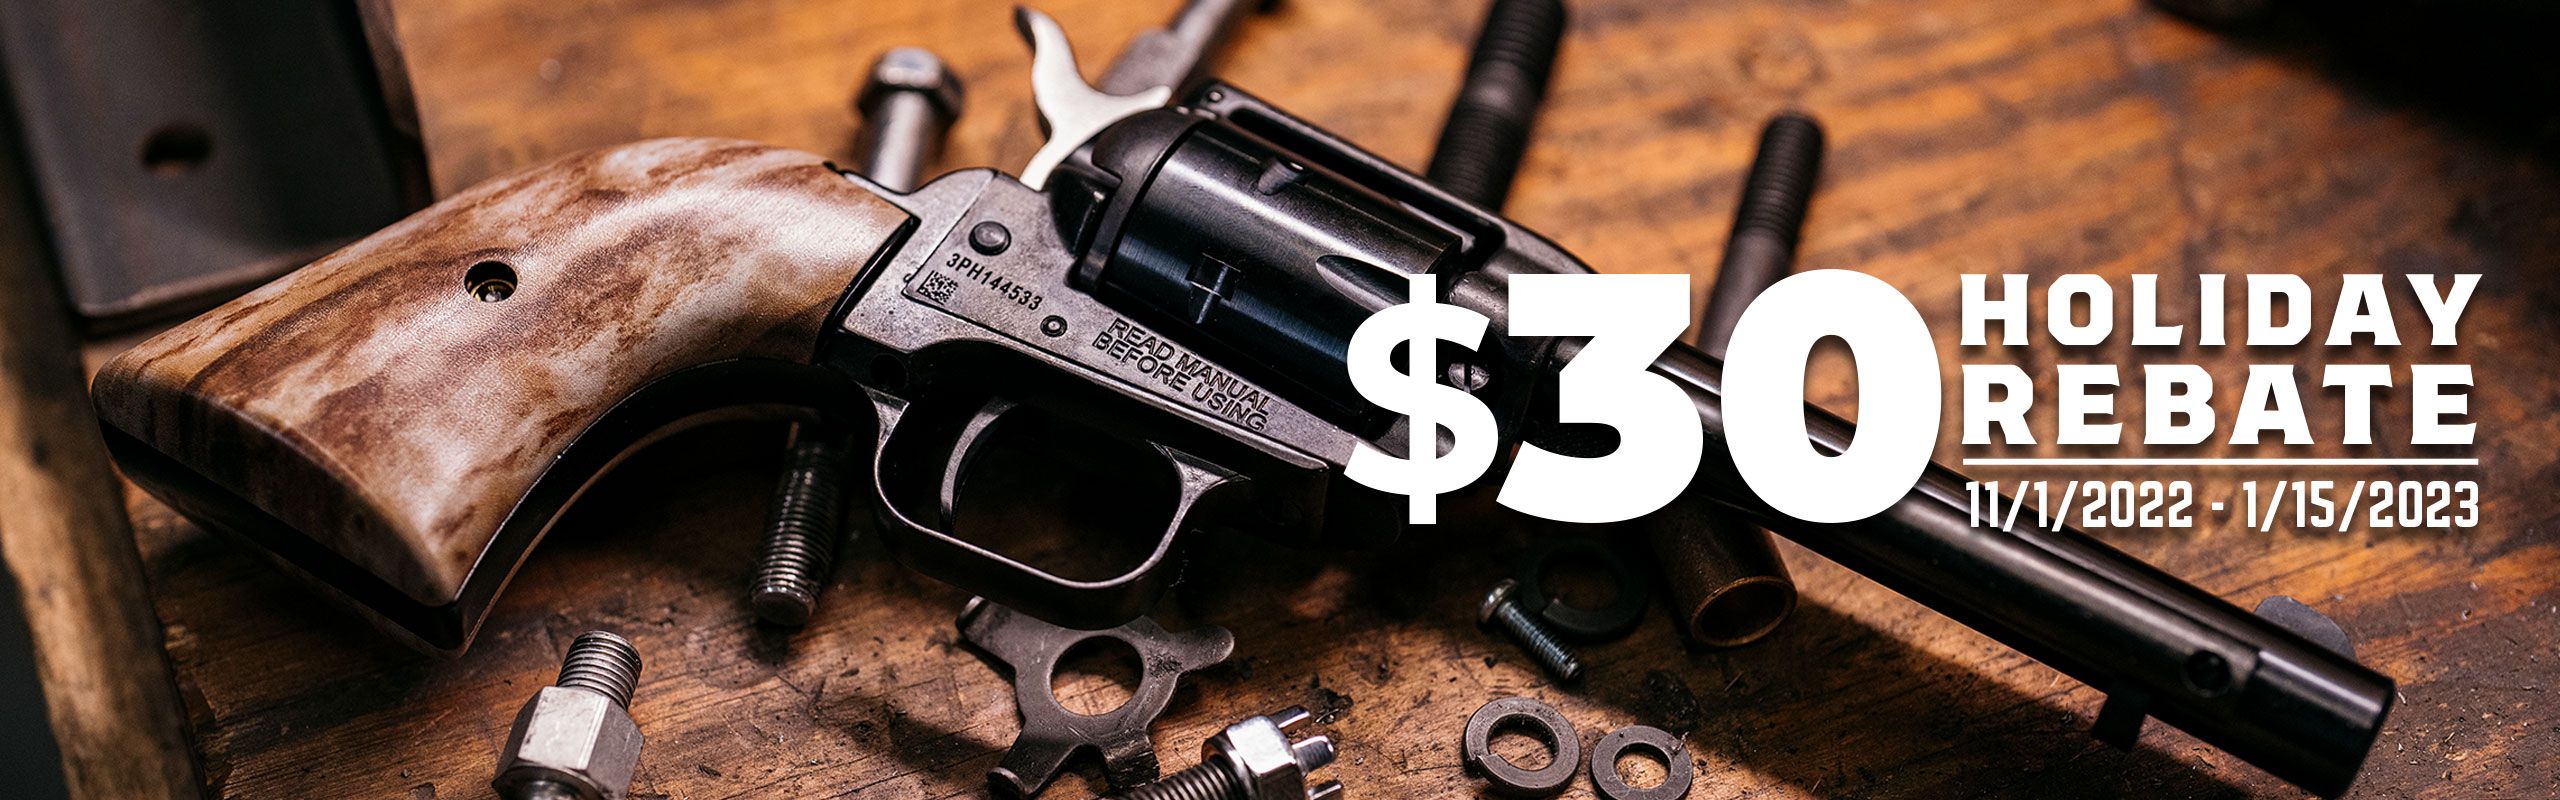 Get $30 Rebate on your new Heritage® Rough Riders, Barkeeps, and Rancher Carbines Purchase